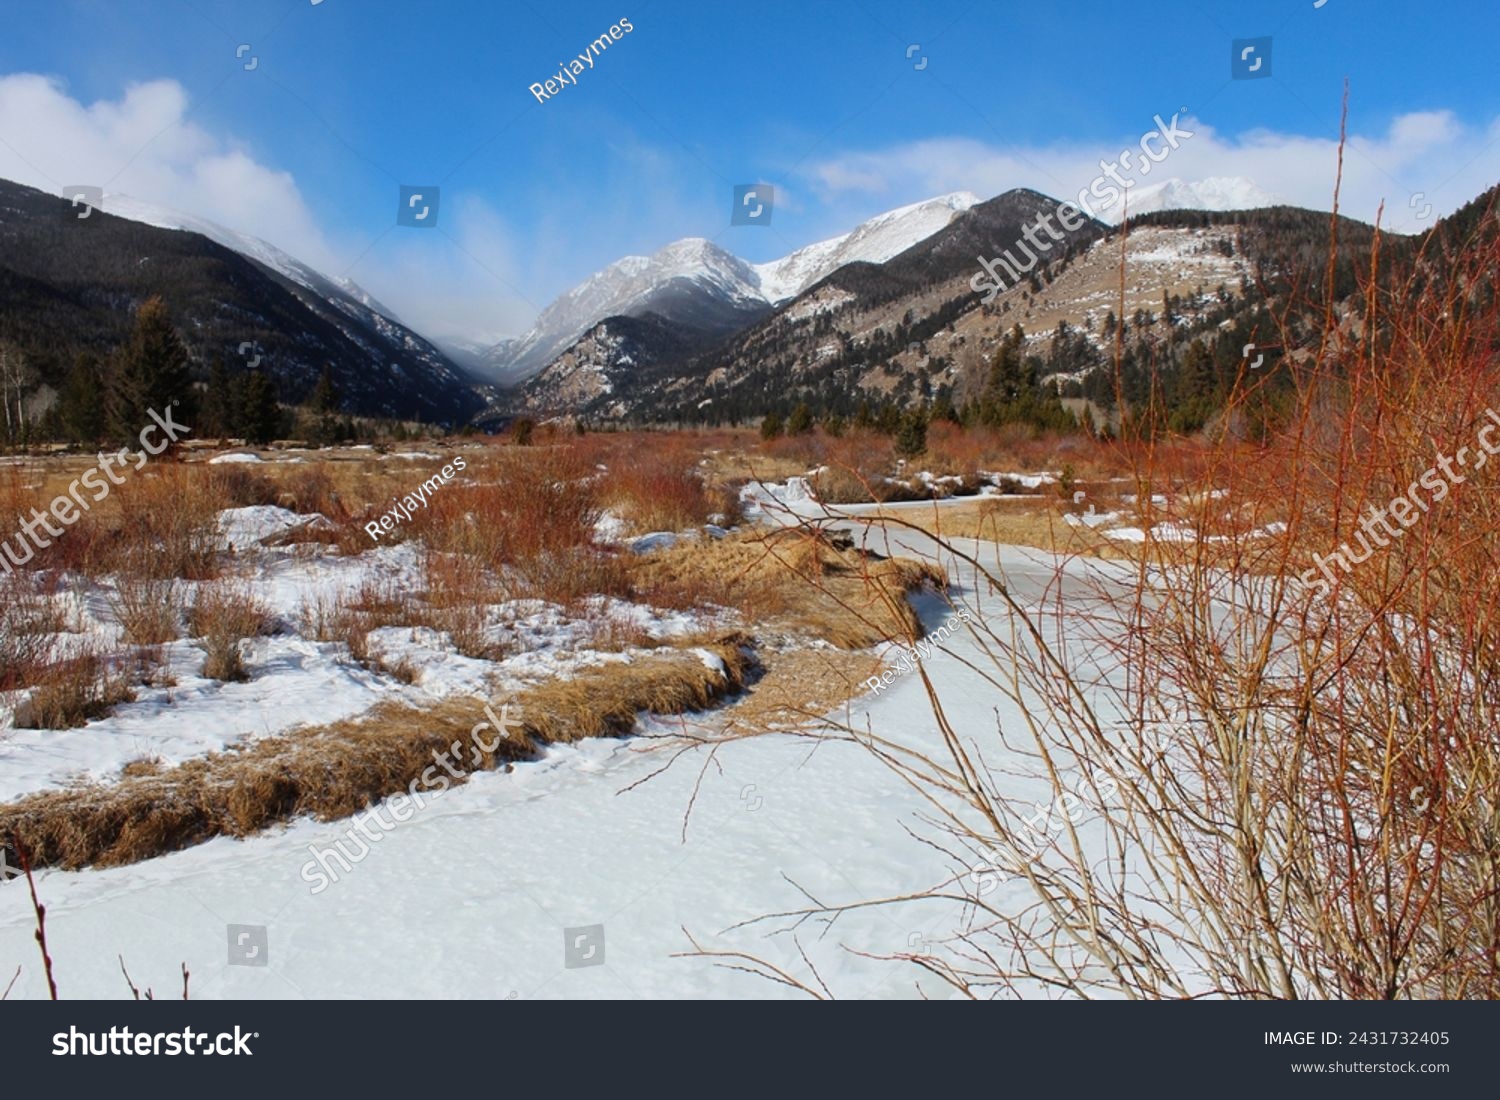 Snow in varying degrees in the high country in the Colorado Rockies.  Trees and snow in the foreground of the Mountains of Colorado.  Pockets of snow and drifts surrounded by dormant vegetation.   #2431732405